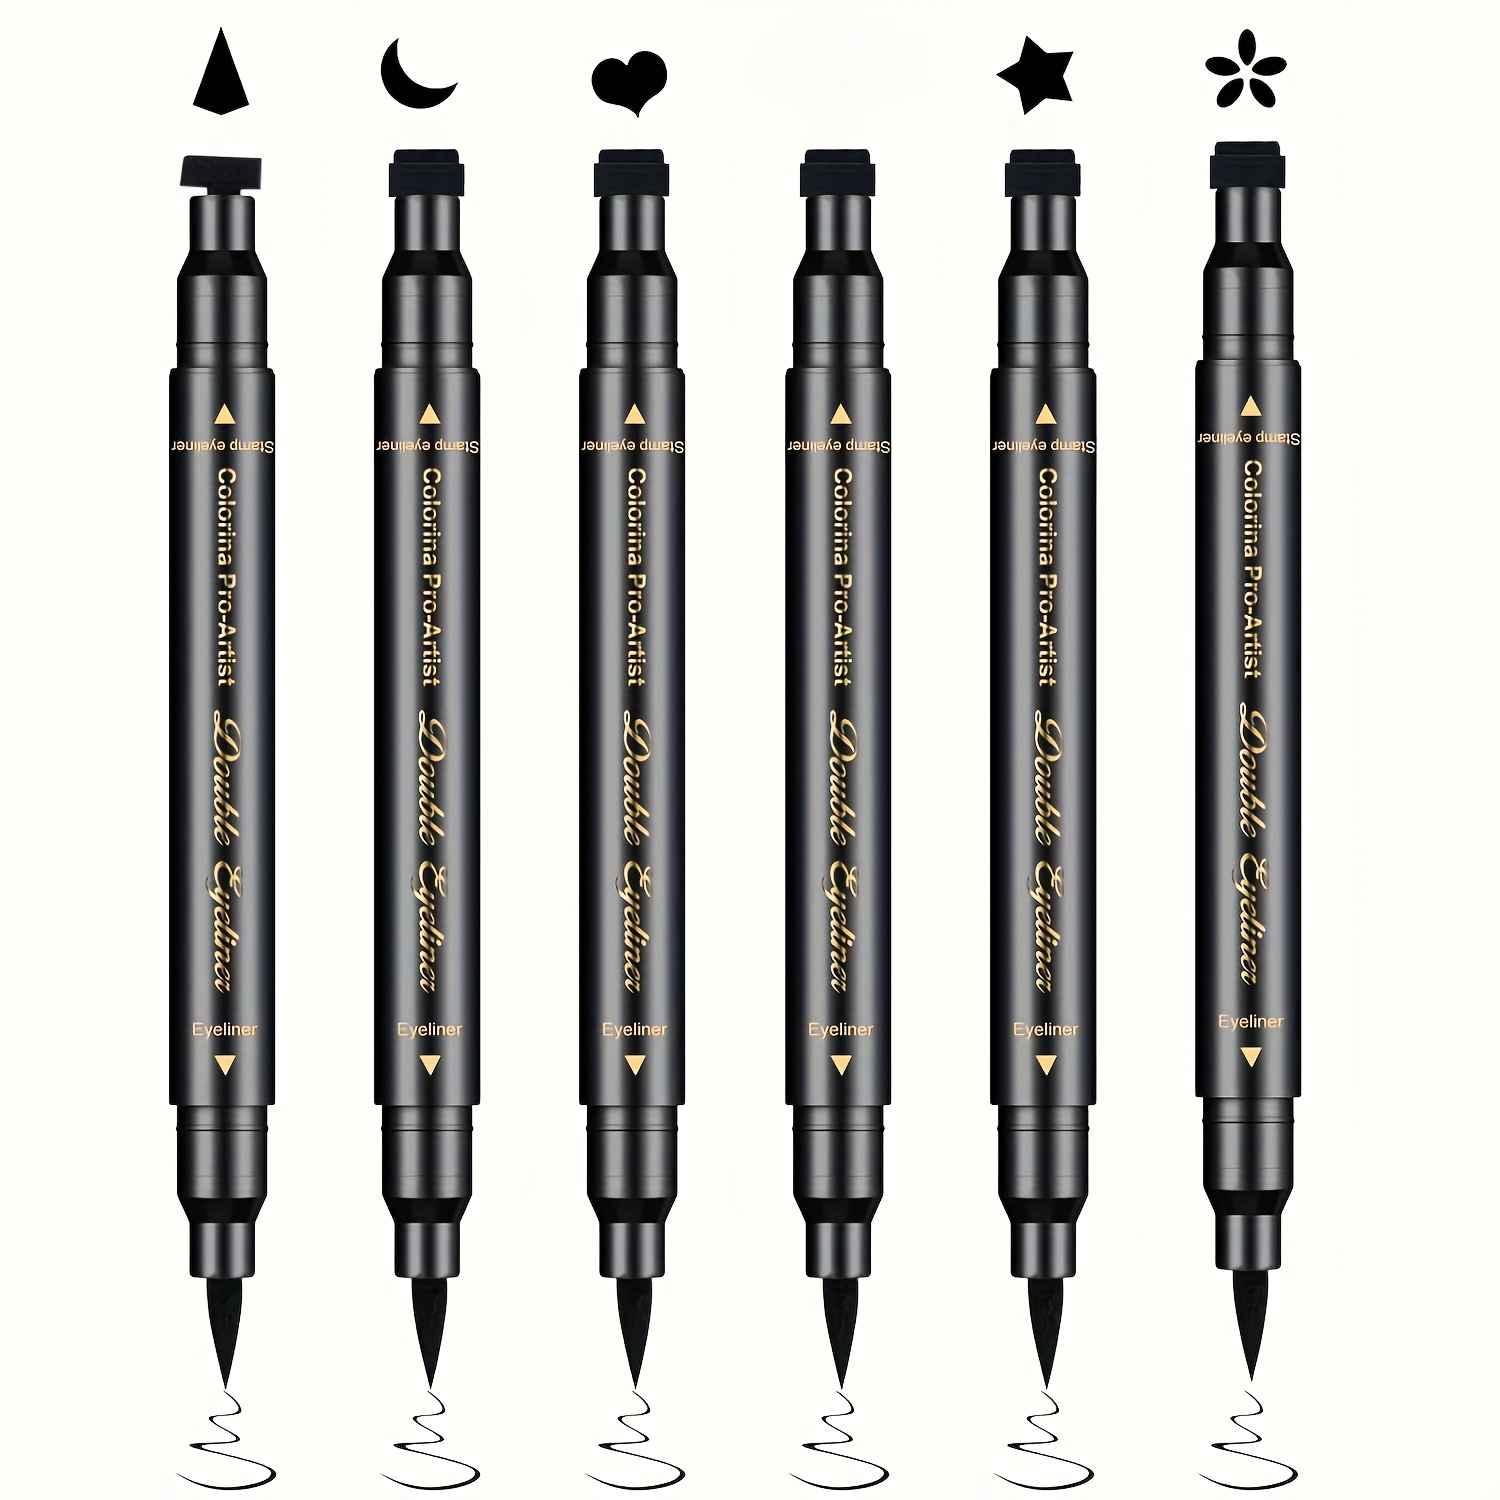 

6 Pcs Liquid Eyeliner Set, Double-ended Waterproof Smudge-proof Eyeliner Stamp Pen Eyeliner Tattoo Tool Makeup, With Face Triangle Heart Star Moon Flower Pattern